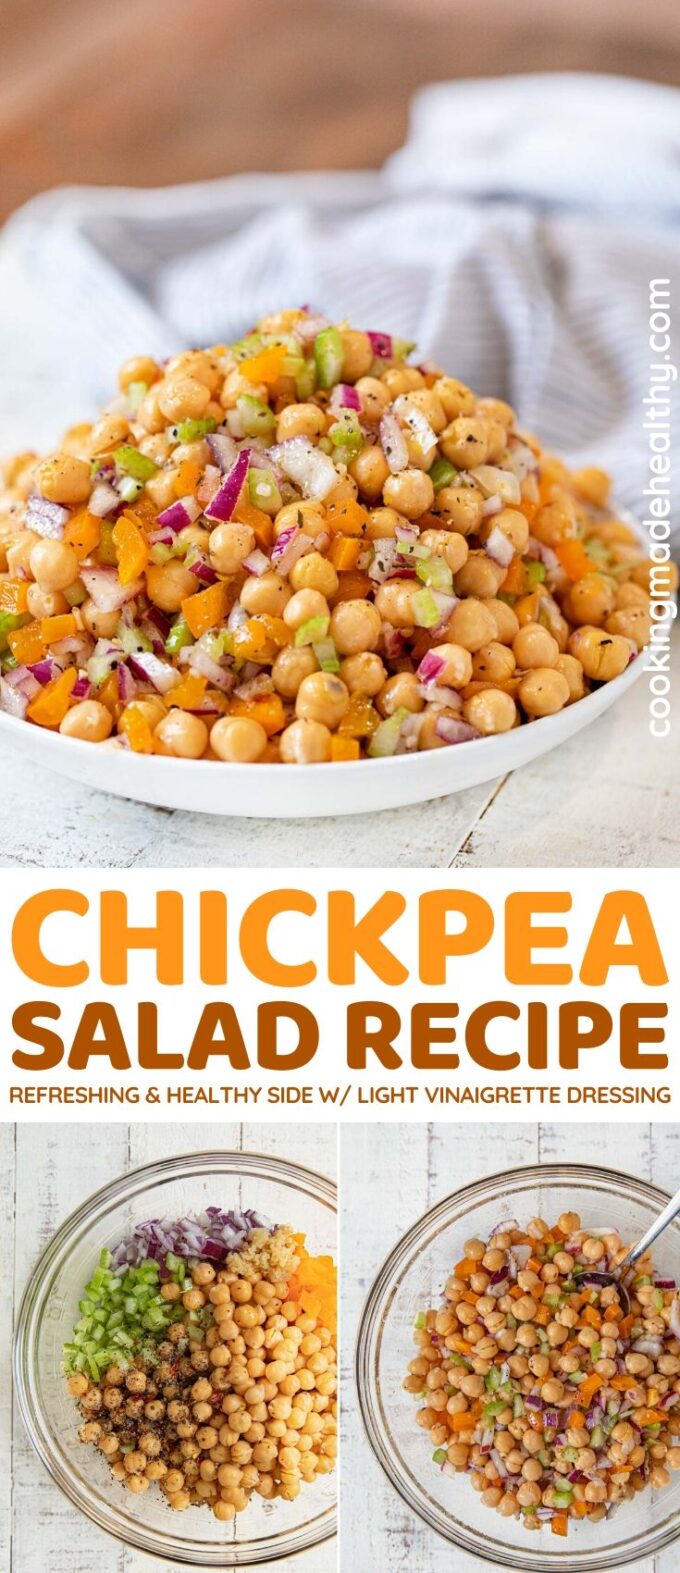 Chickpea Salad Recipe - Cooking Made Healthy